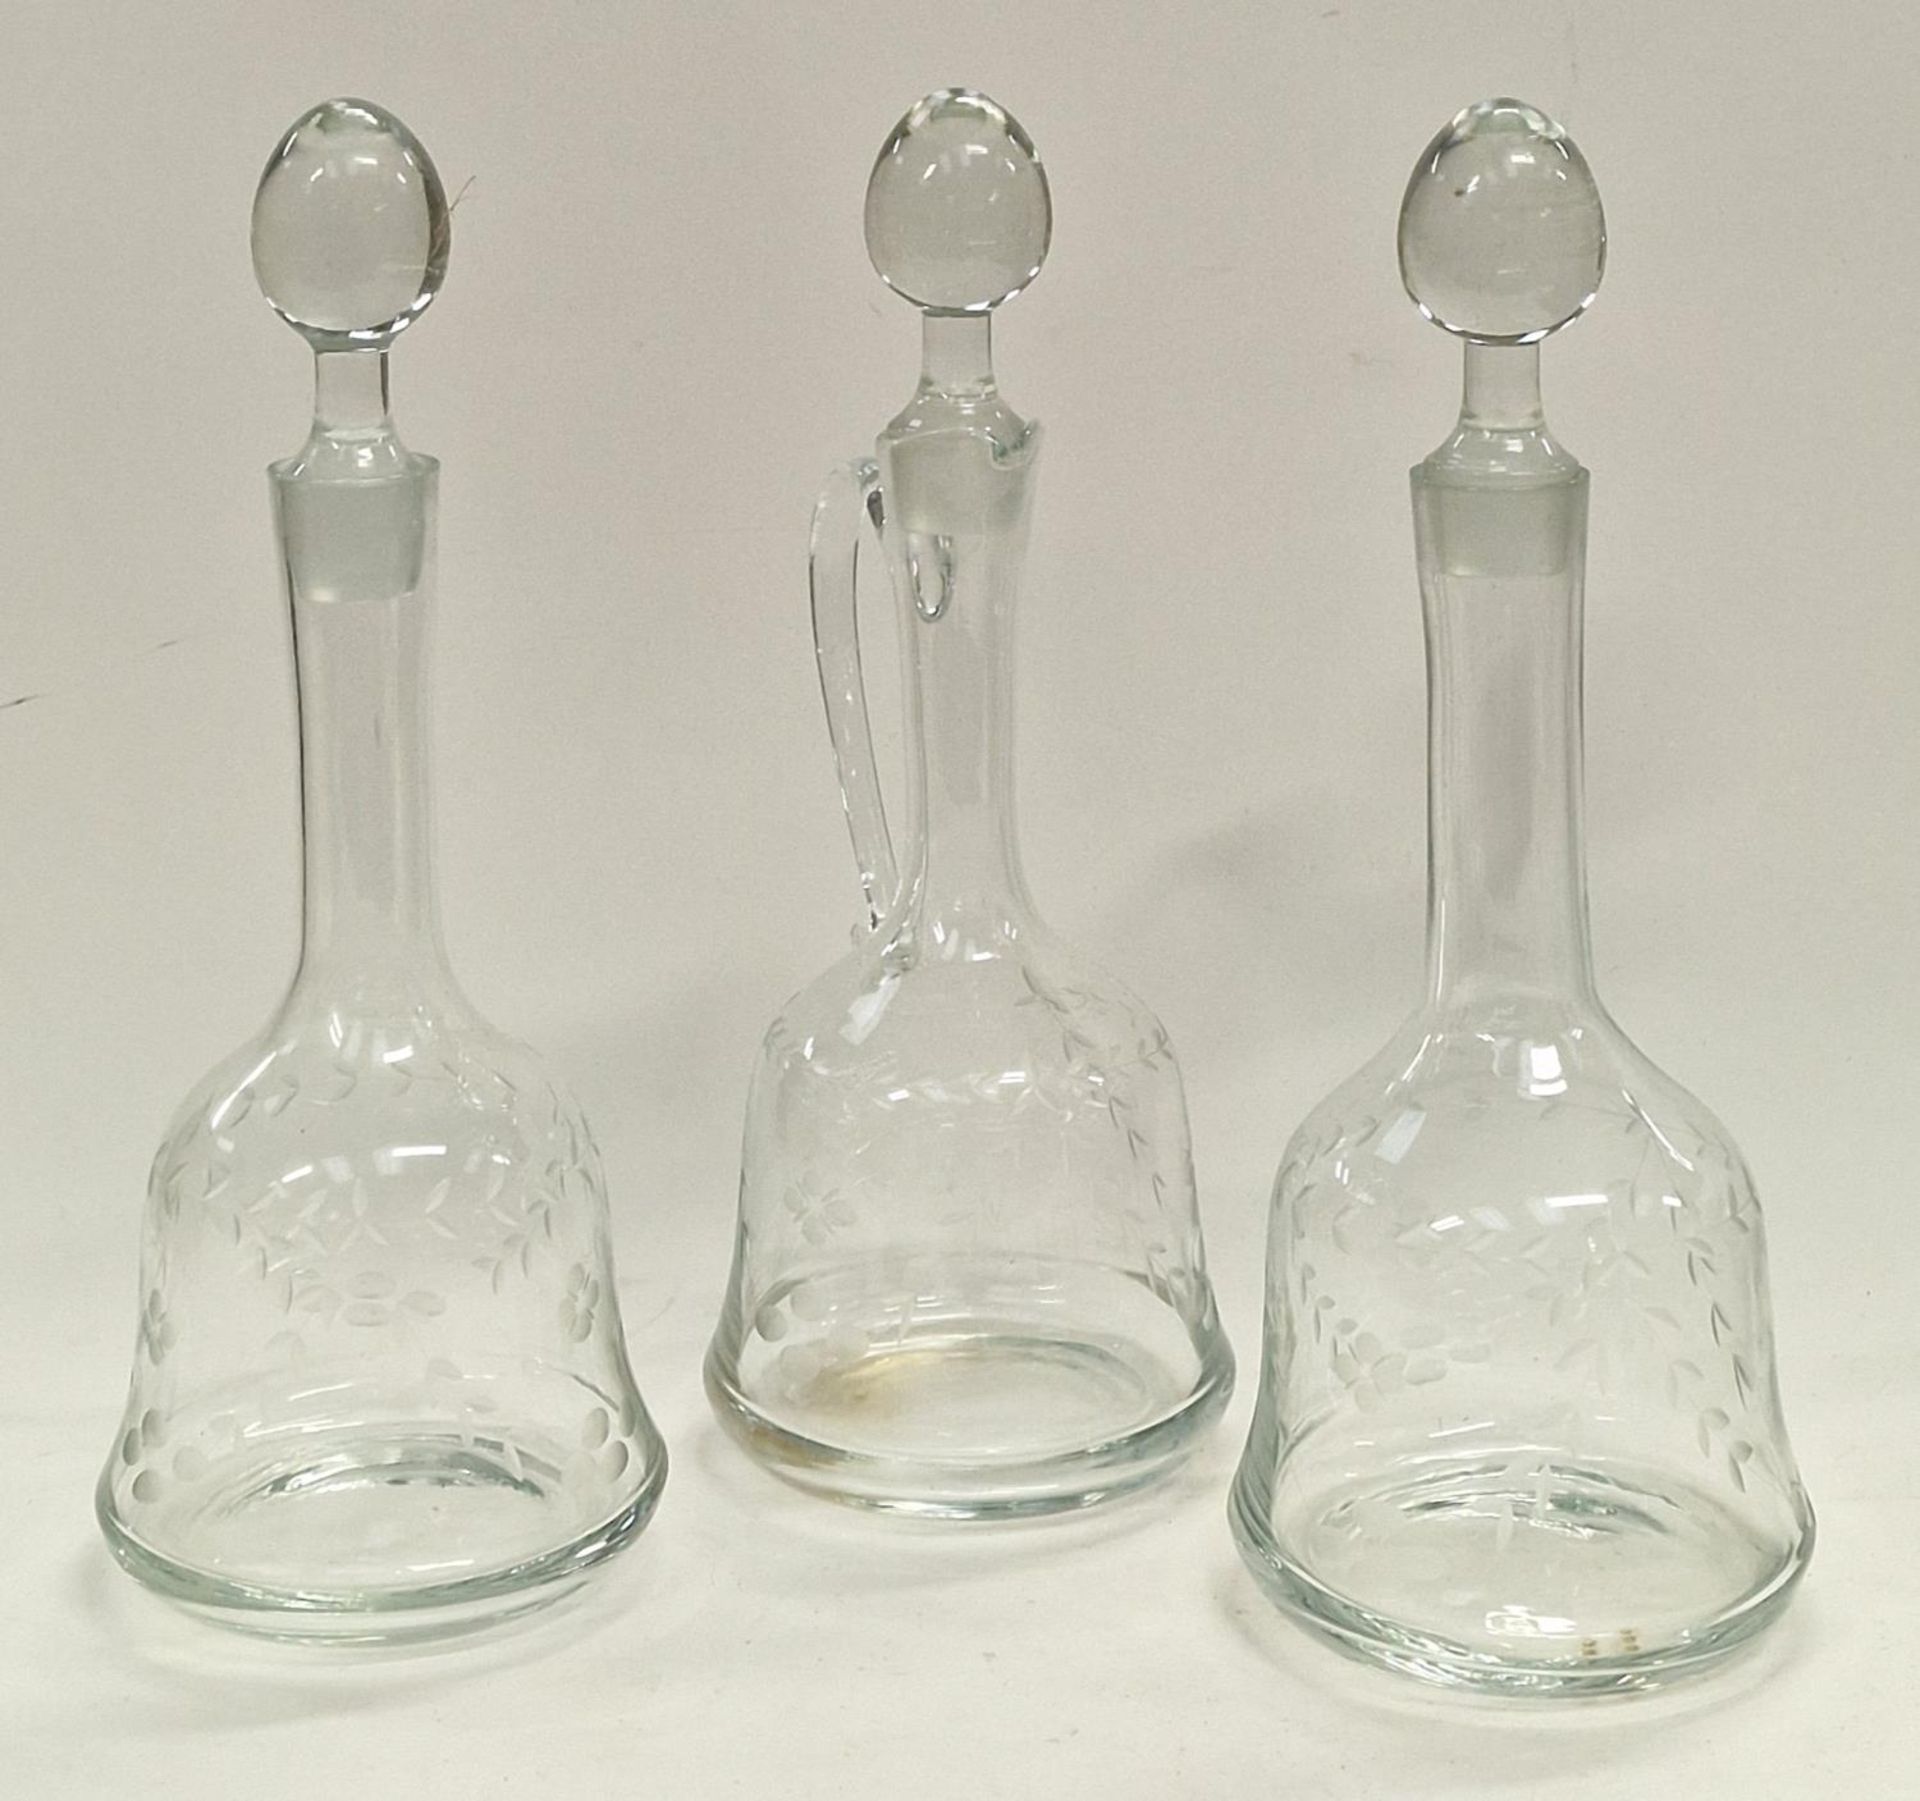 Three etched glass decanters with stoppers.